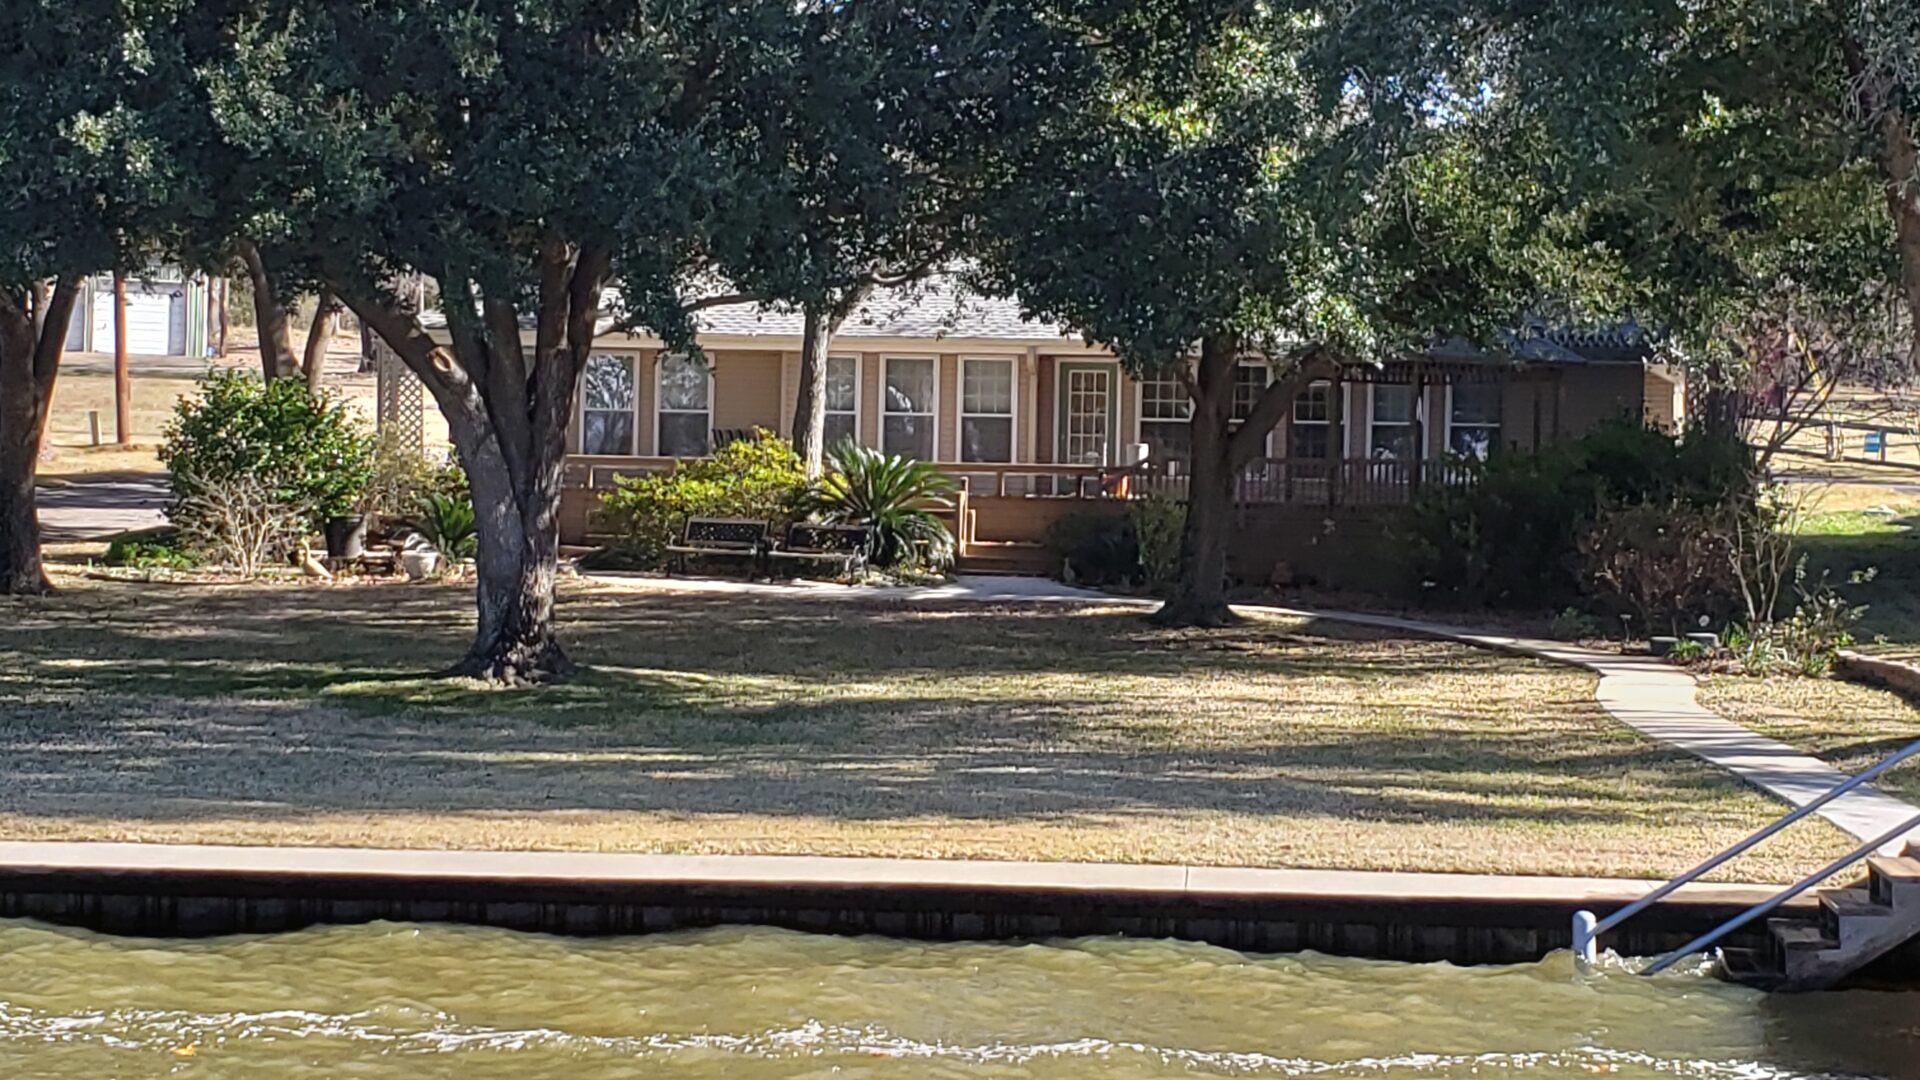 Front view of the house owned by Jessica & Early D.